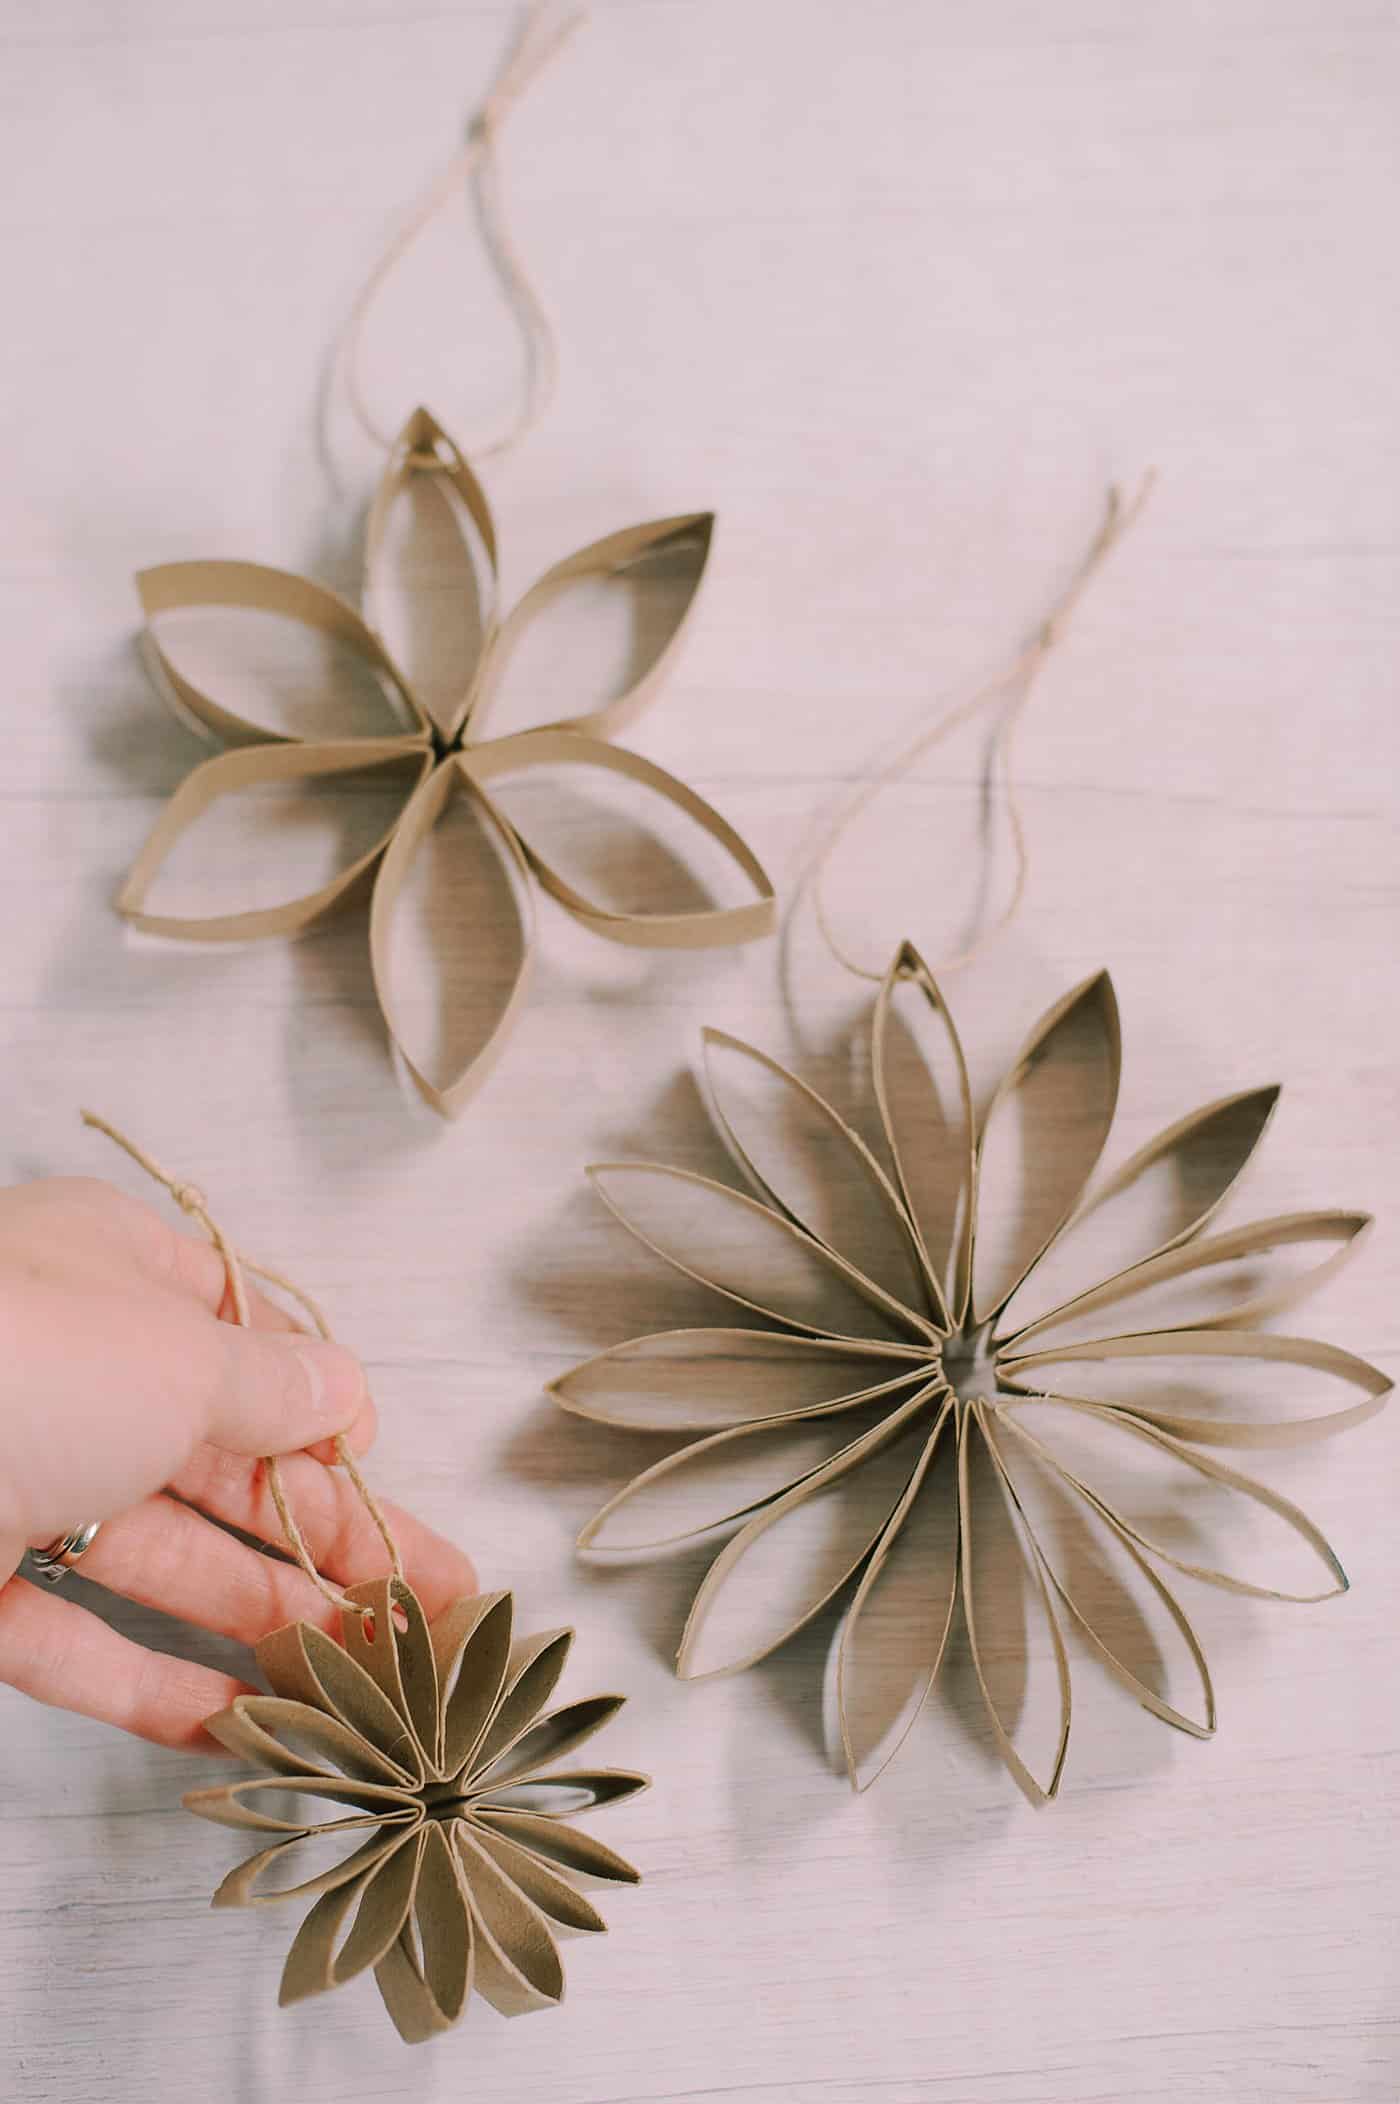 How to make DIY toilet paper roll flower ornaments.